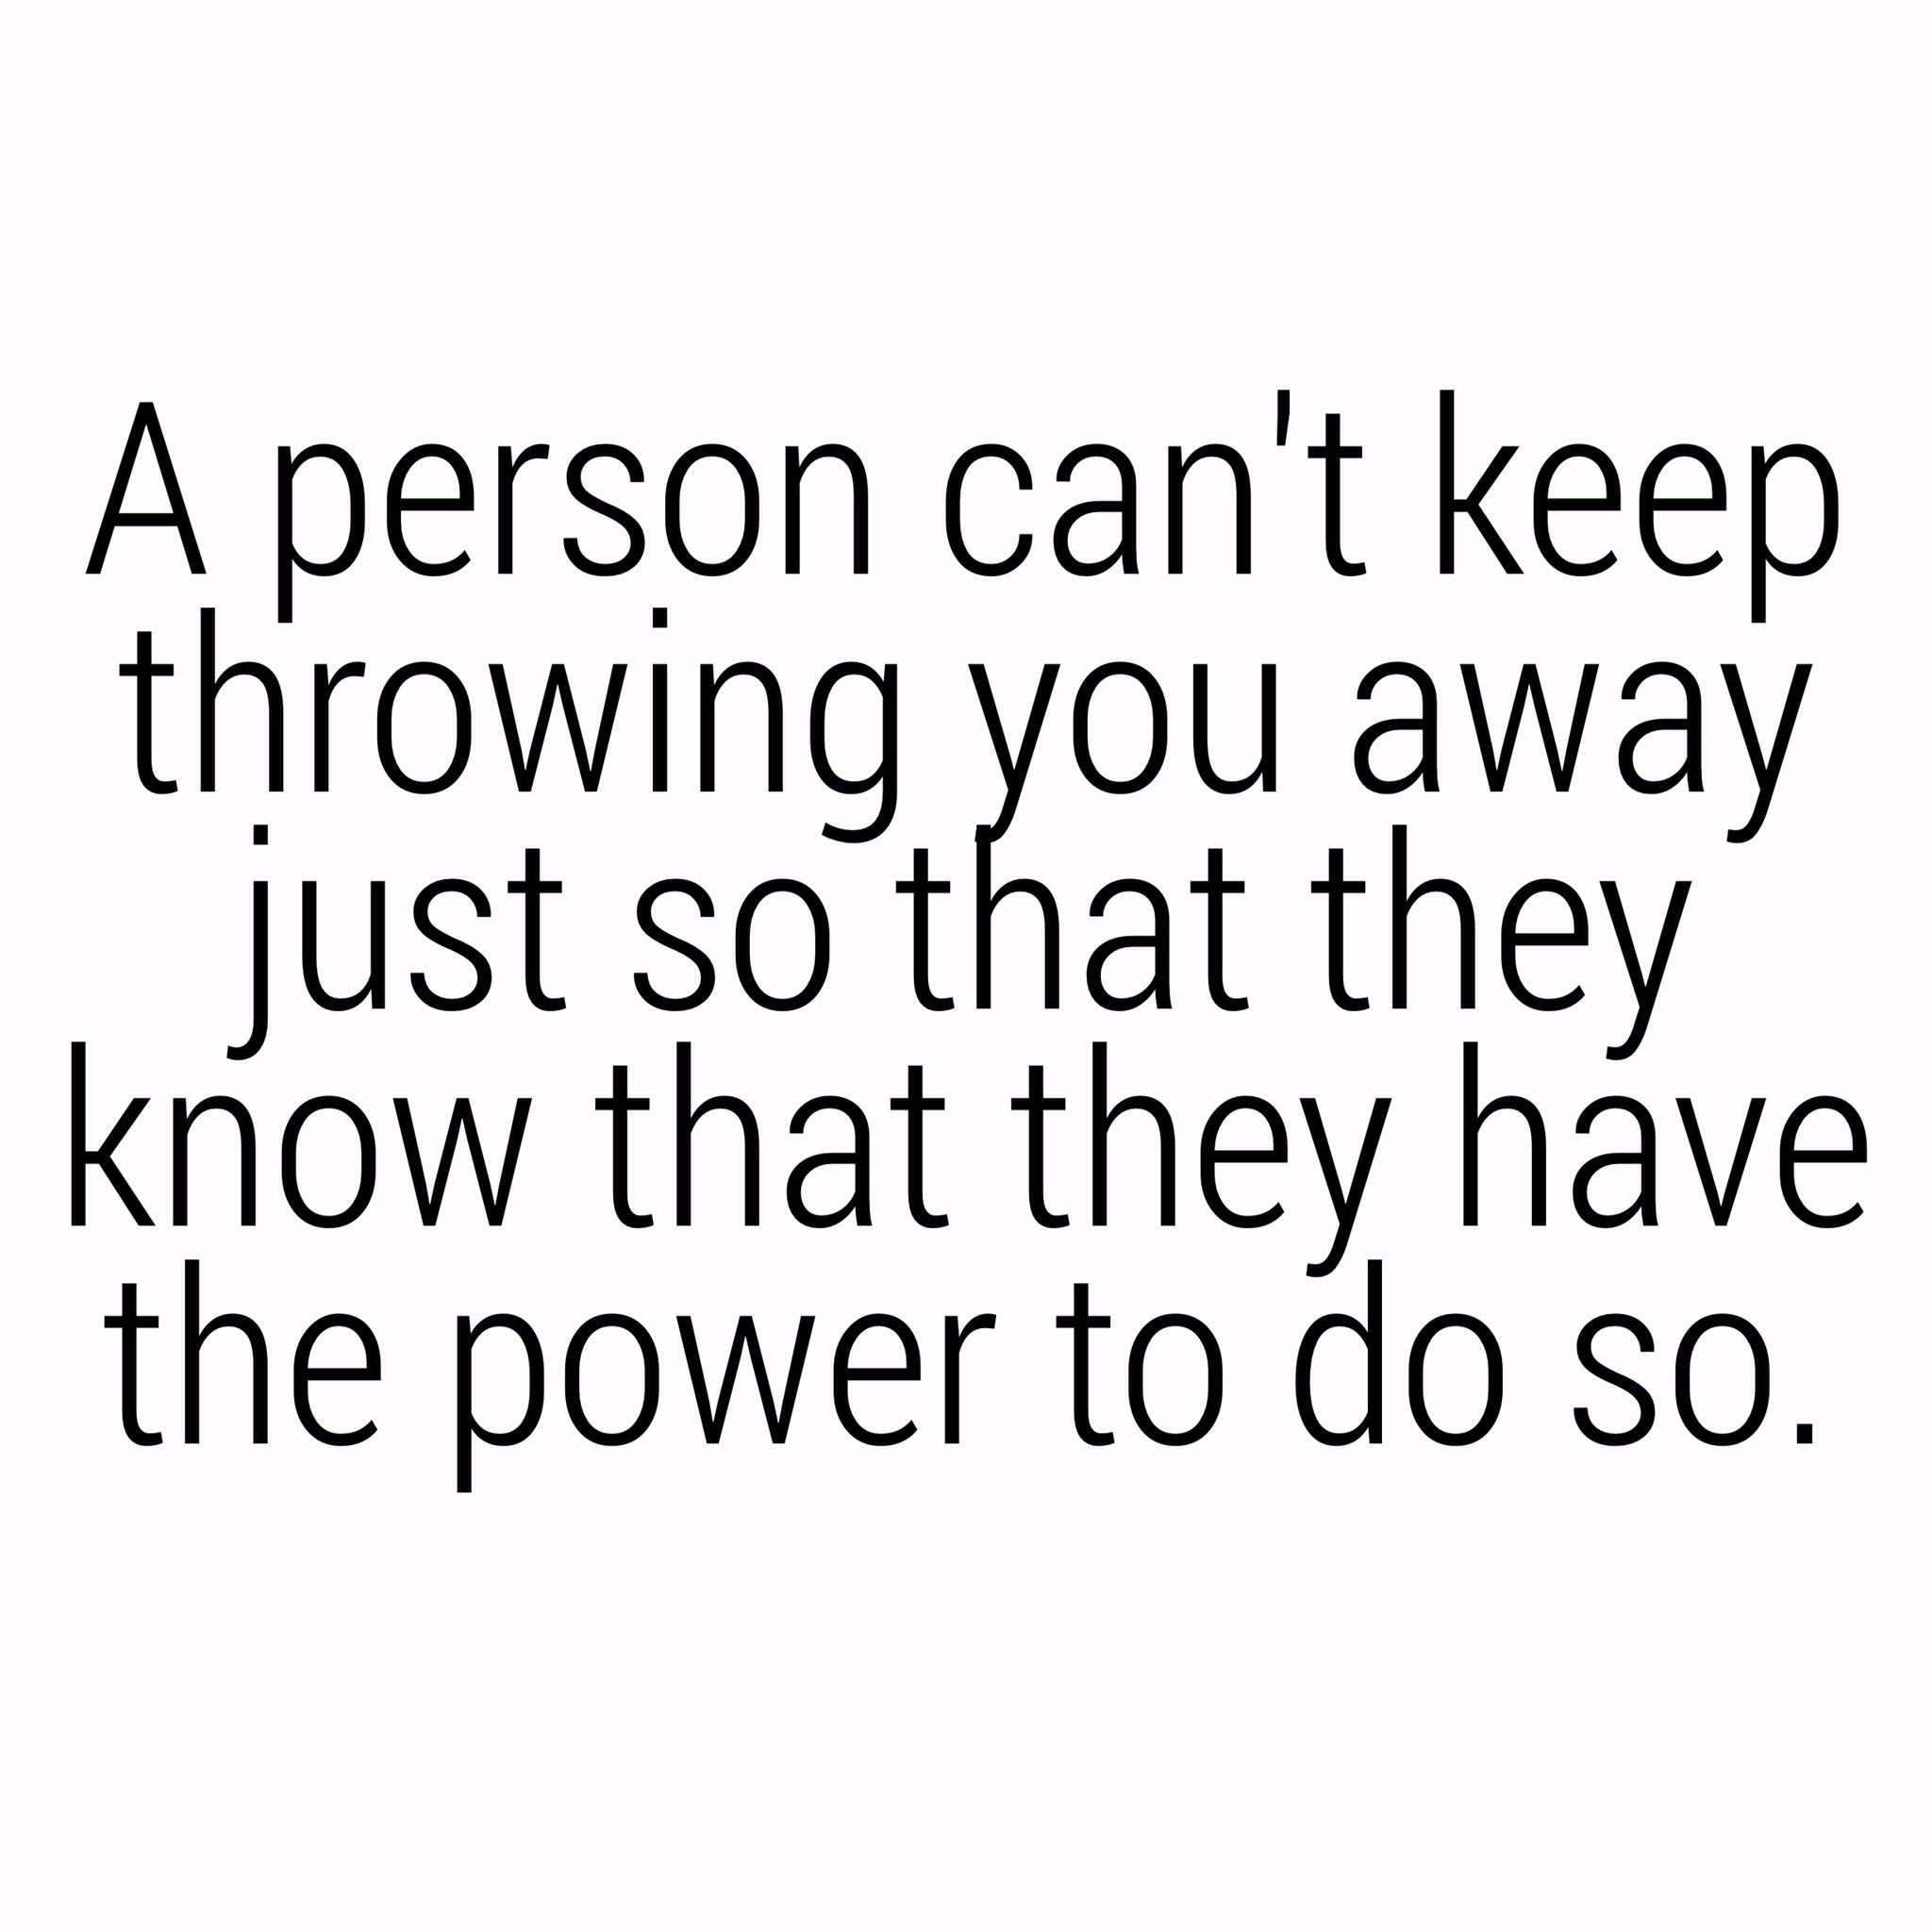 A person can t keep throwing you away just so they can high off